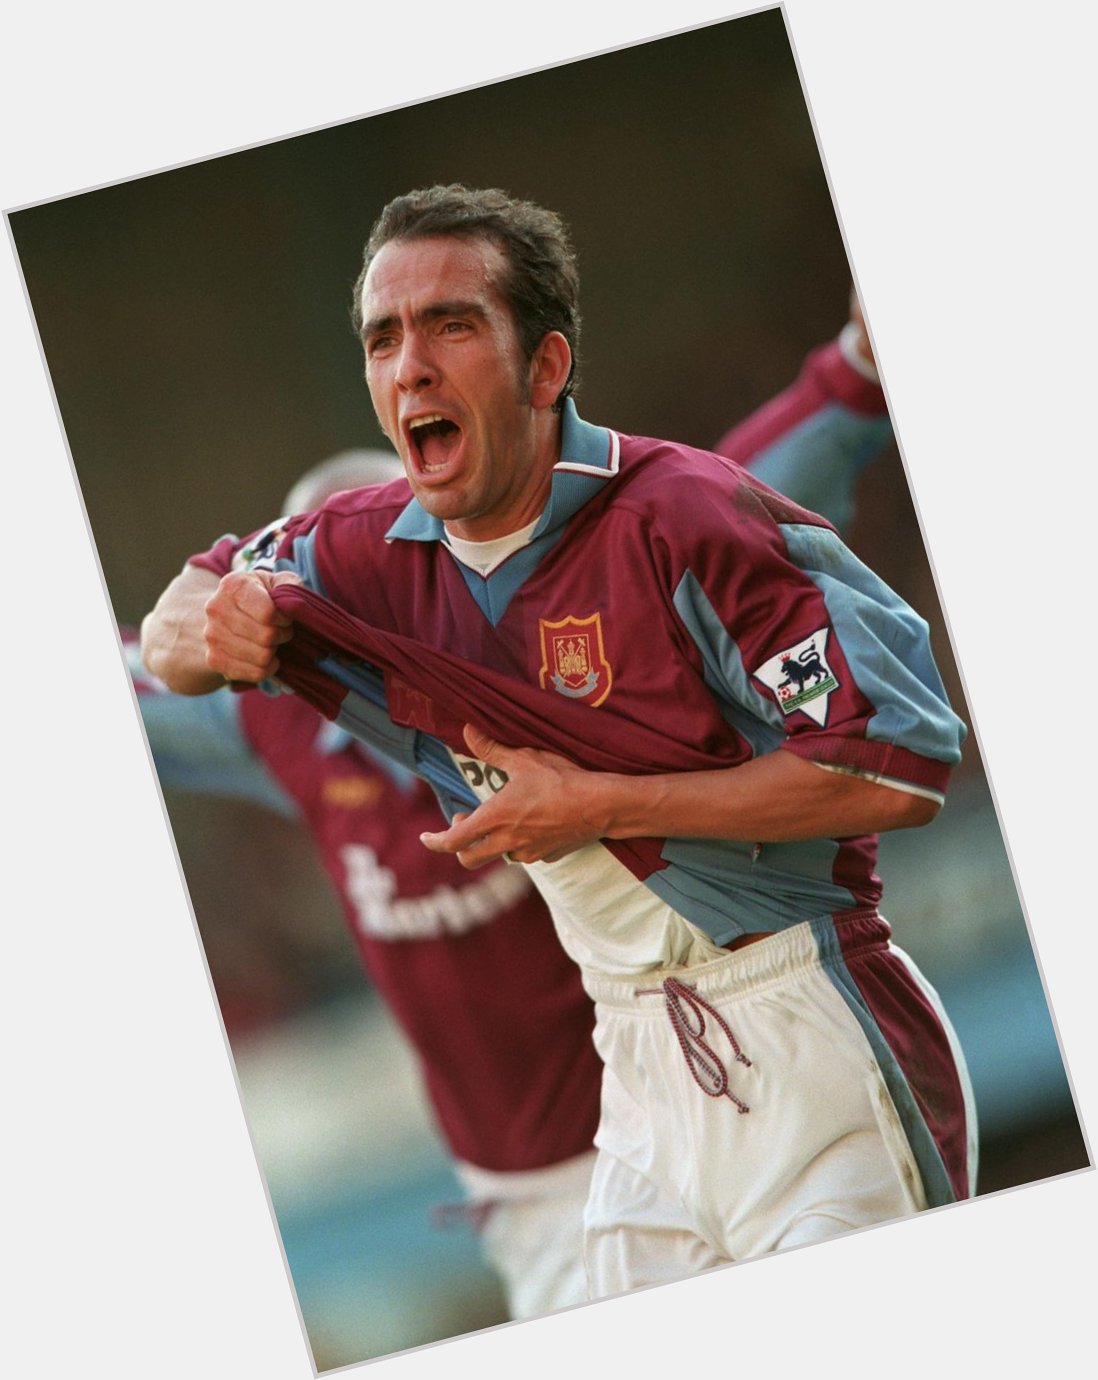 Wishing a very happy birthday to Paolo Di Canio     